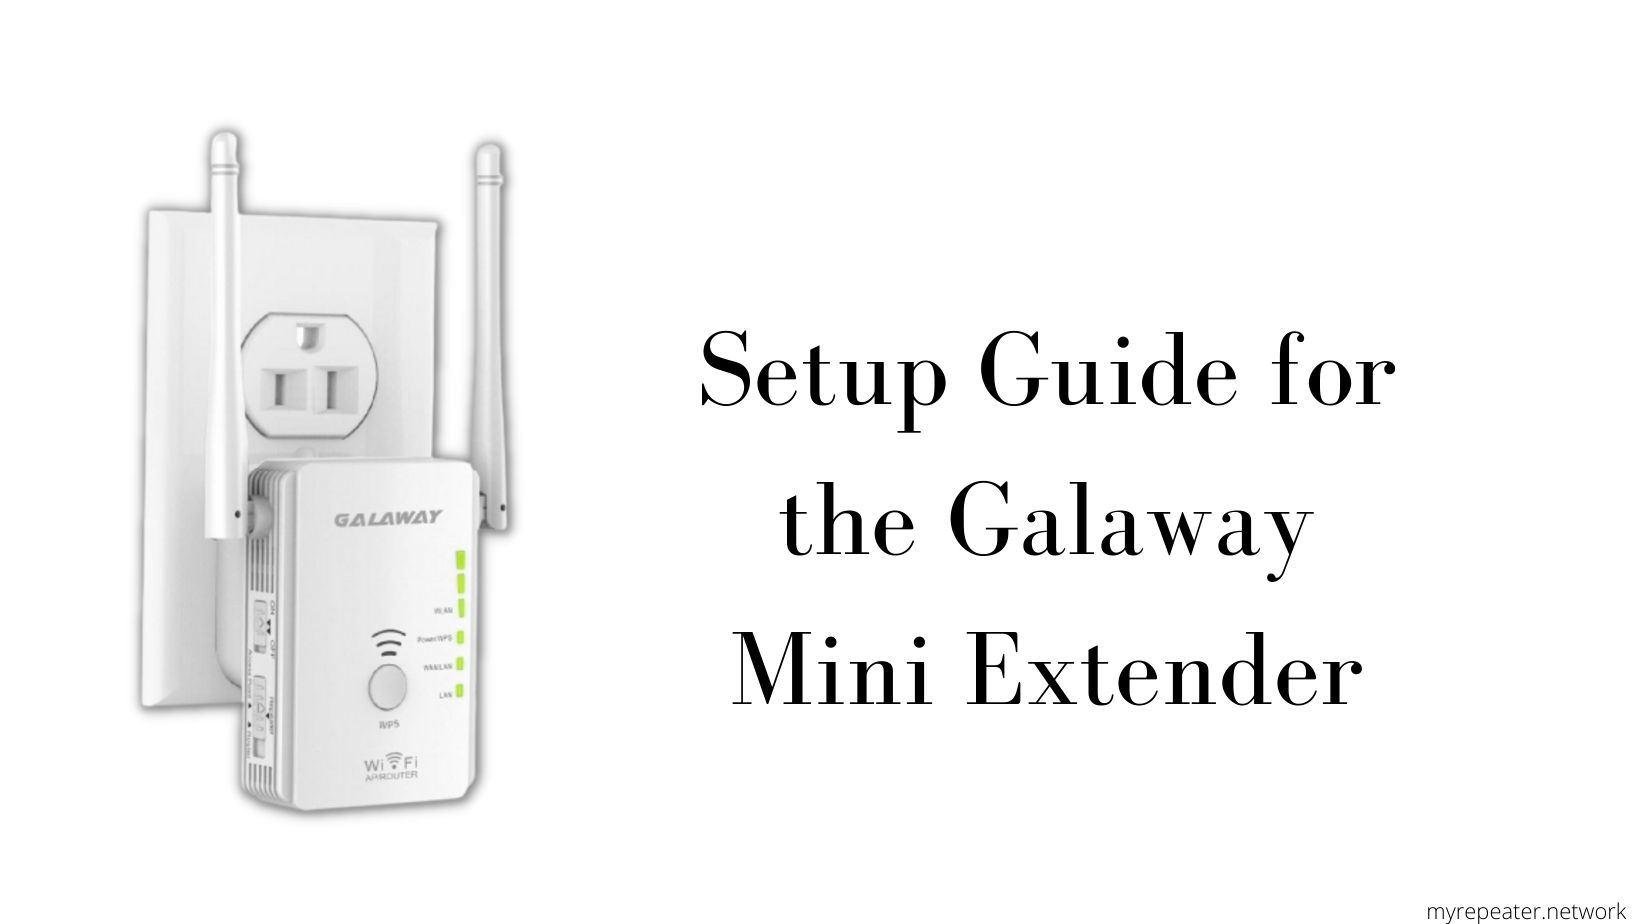 Setup Guide for the Galaway Mini Extender